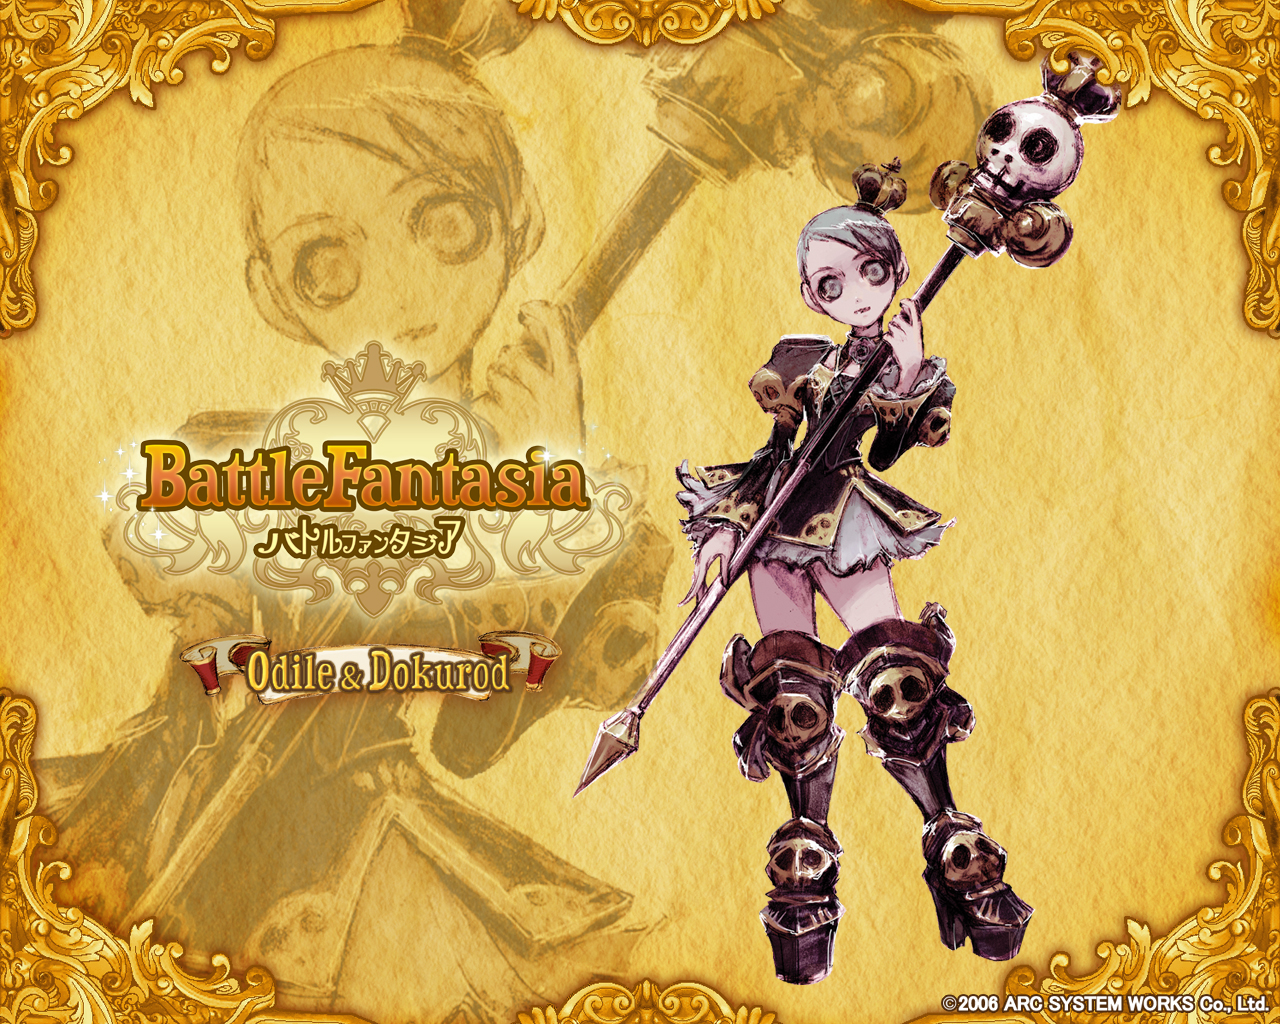 1280x1024 > Battle Fantasia -Revised Edition- Wallpapers